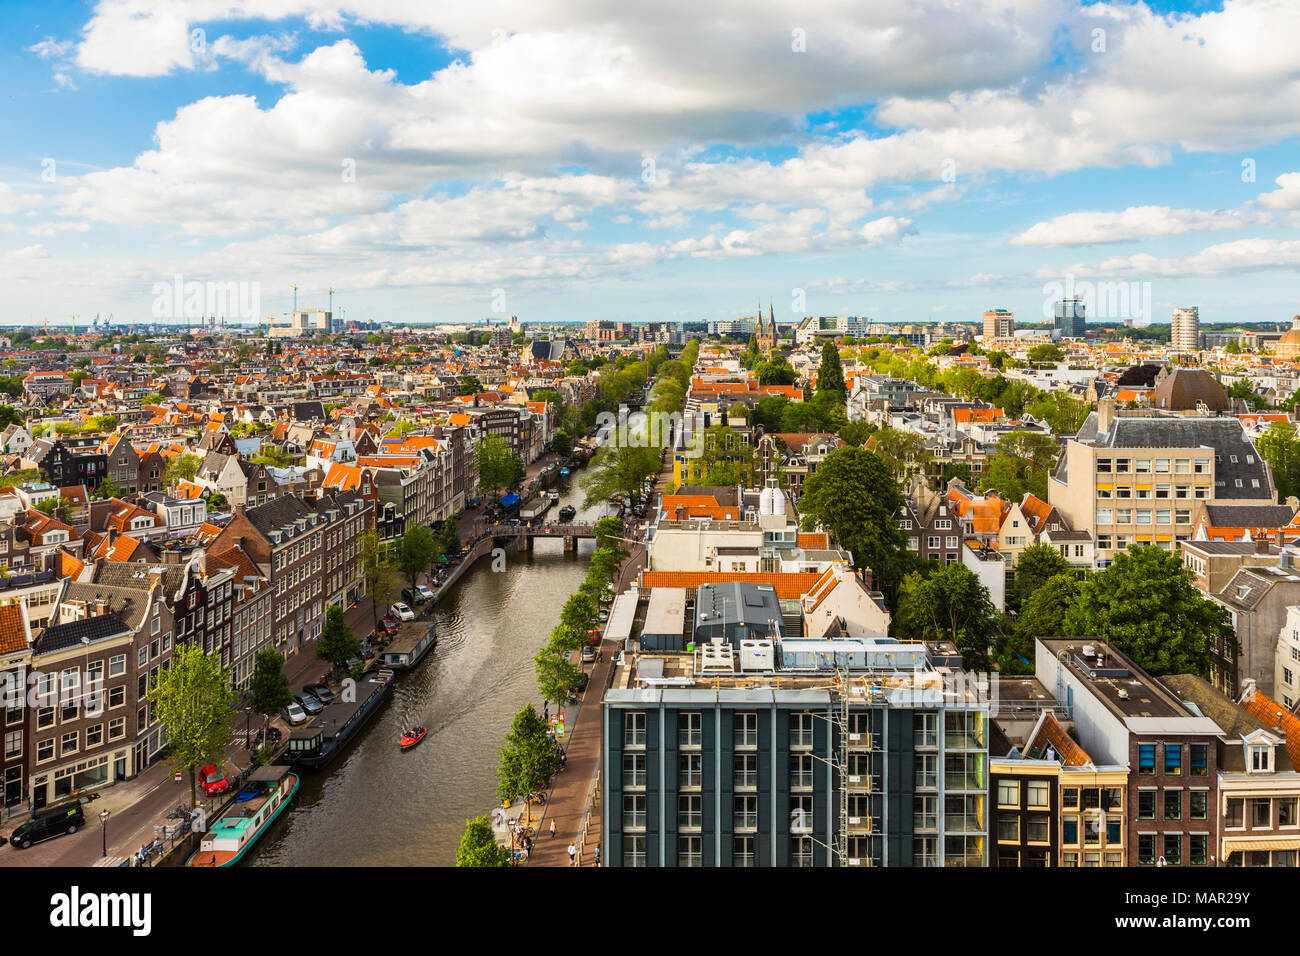 View of Prinsengracht Canal, Amsterdam, Netherlands, Europe Stock Photo